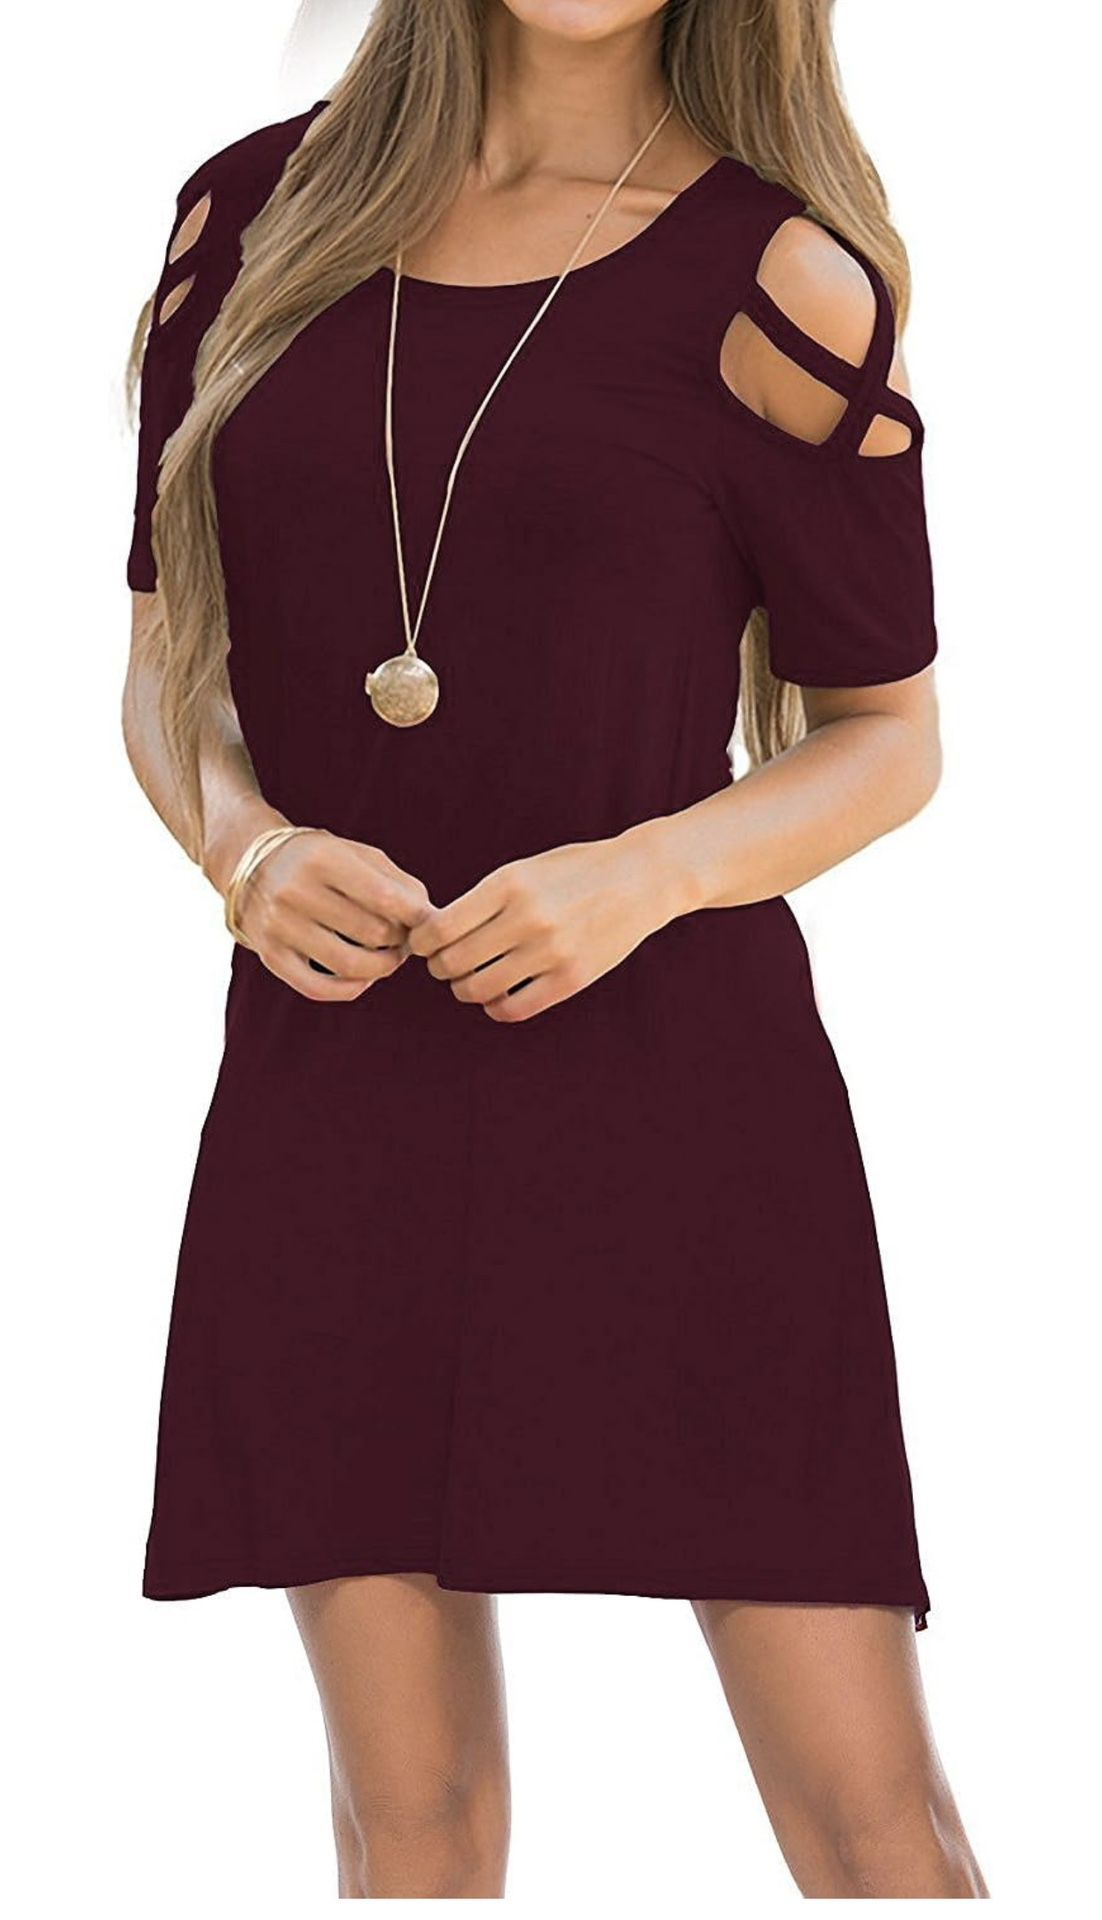  Cold Shoulder Loose Tunic Casual T Shirt Dress Burgundy